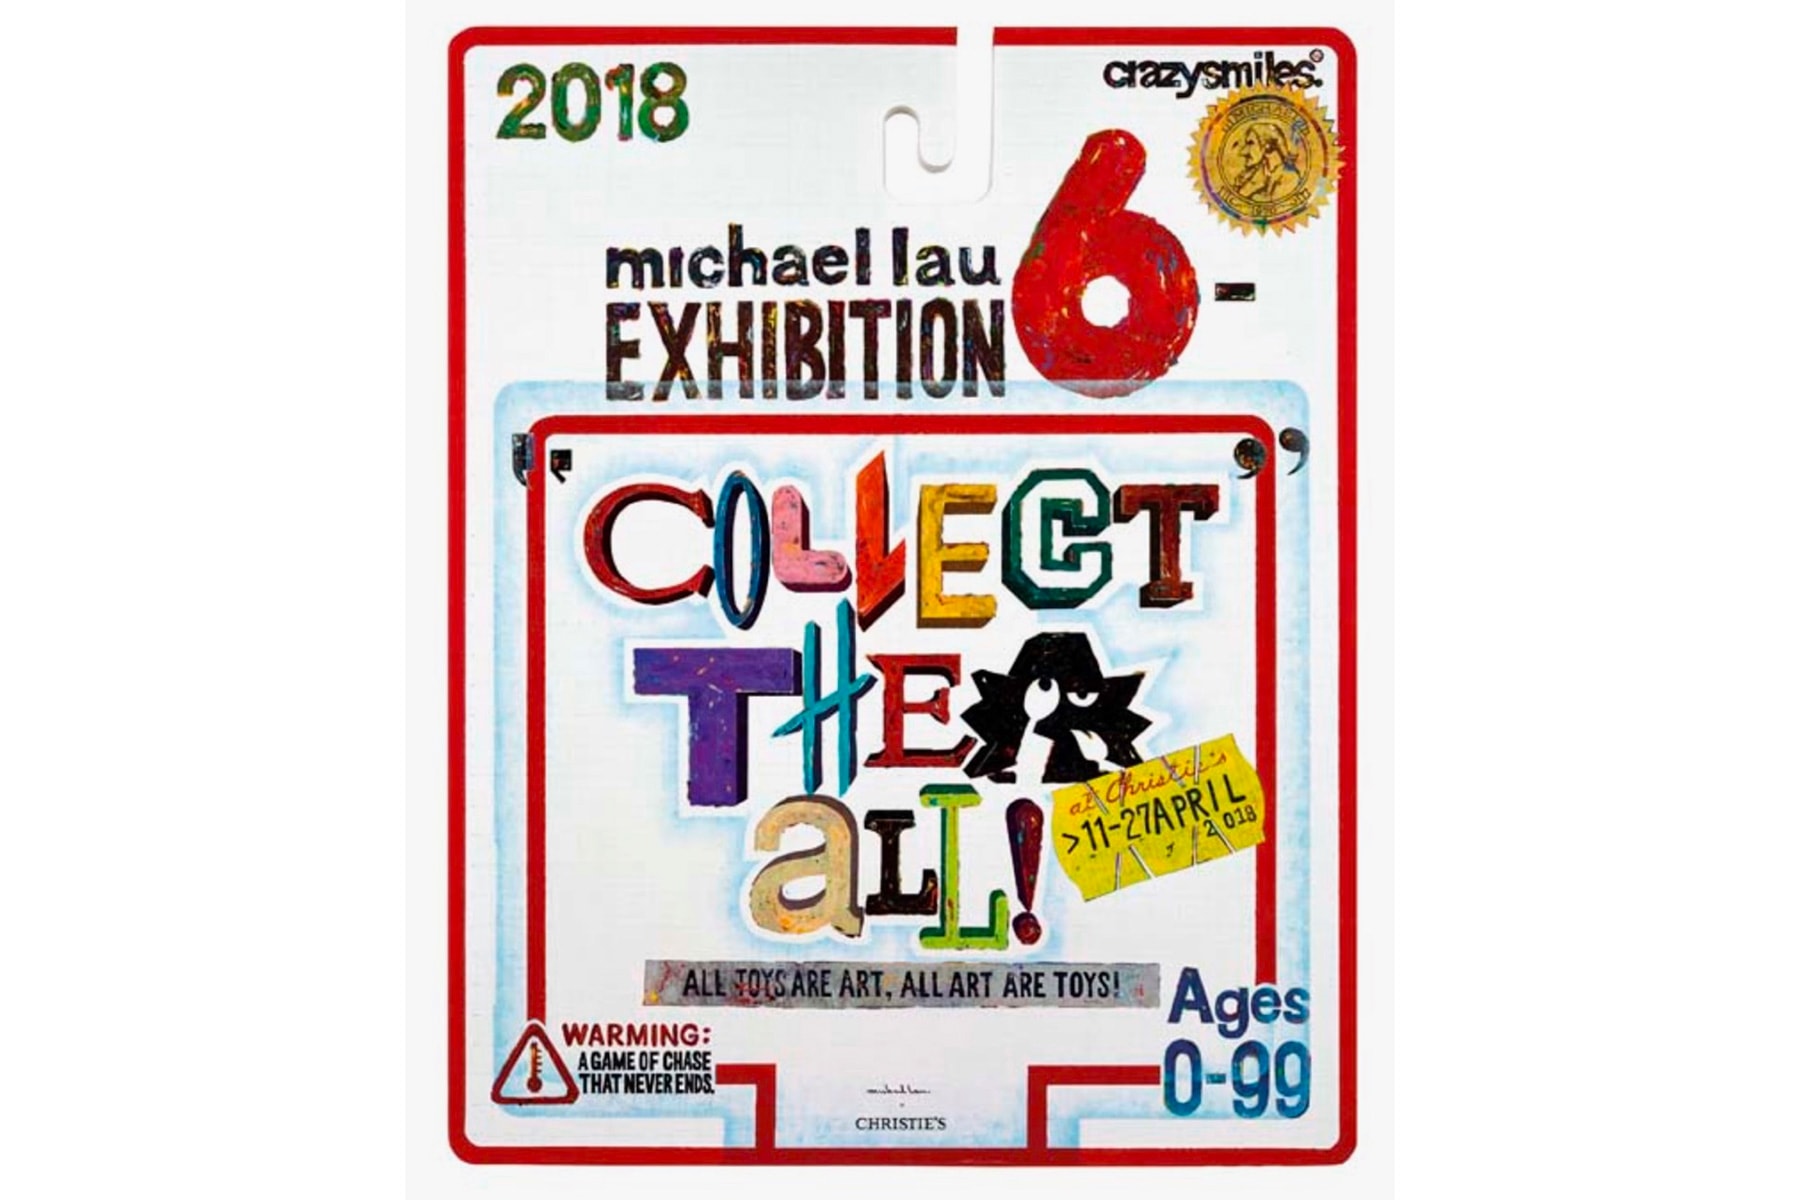 Michael Lau Christie's Hong Kong "COLLECT THEM ALL!" Selling Exhibition 2018